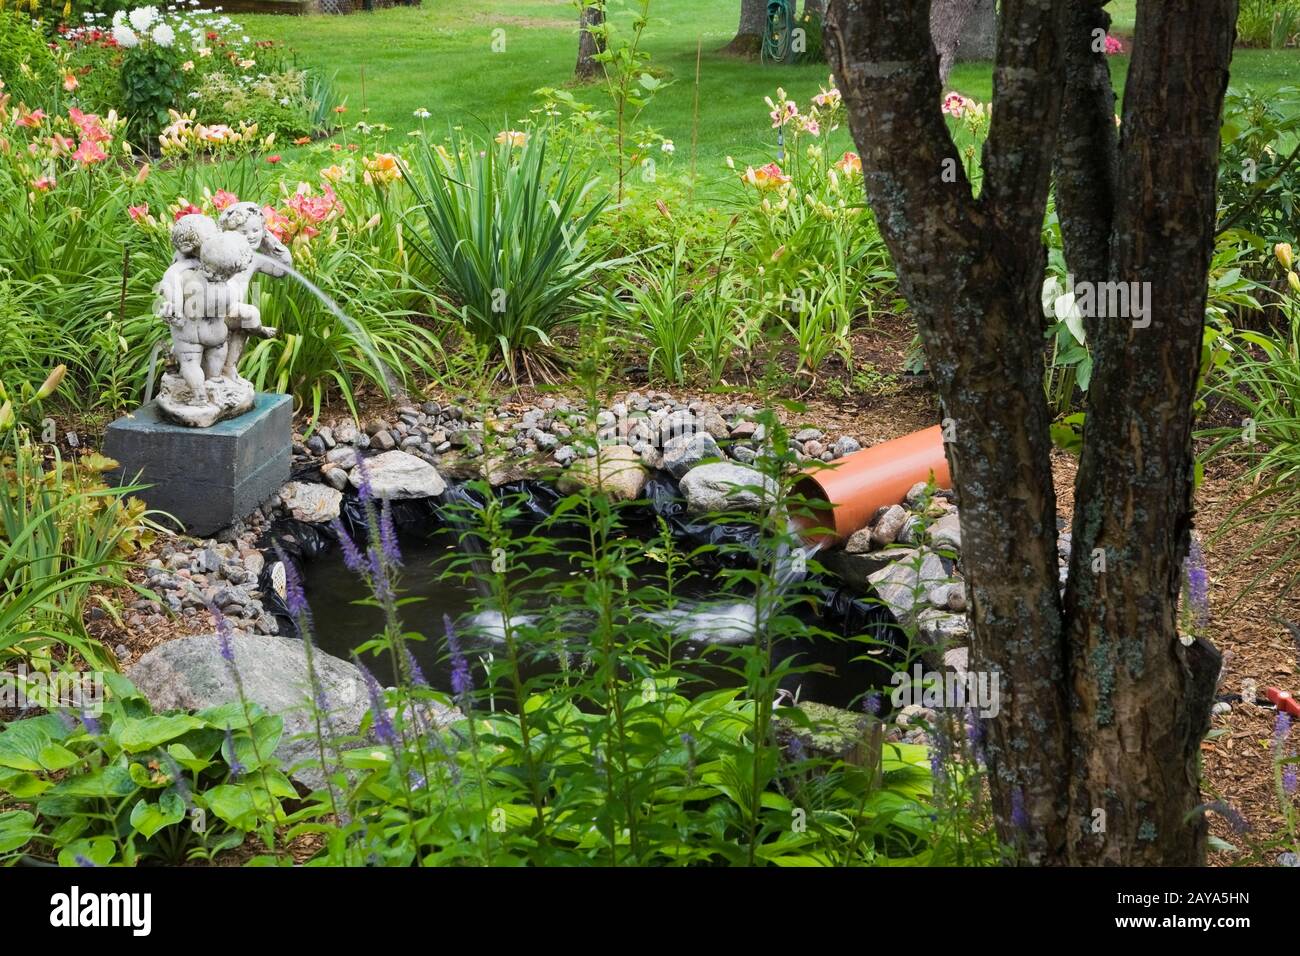 Malus bacata columnaris - Crabapple Tree next to small pond with water fountain statue and blue Veronica -Speedwell flowers including Hemerocallis. Stock Photo